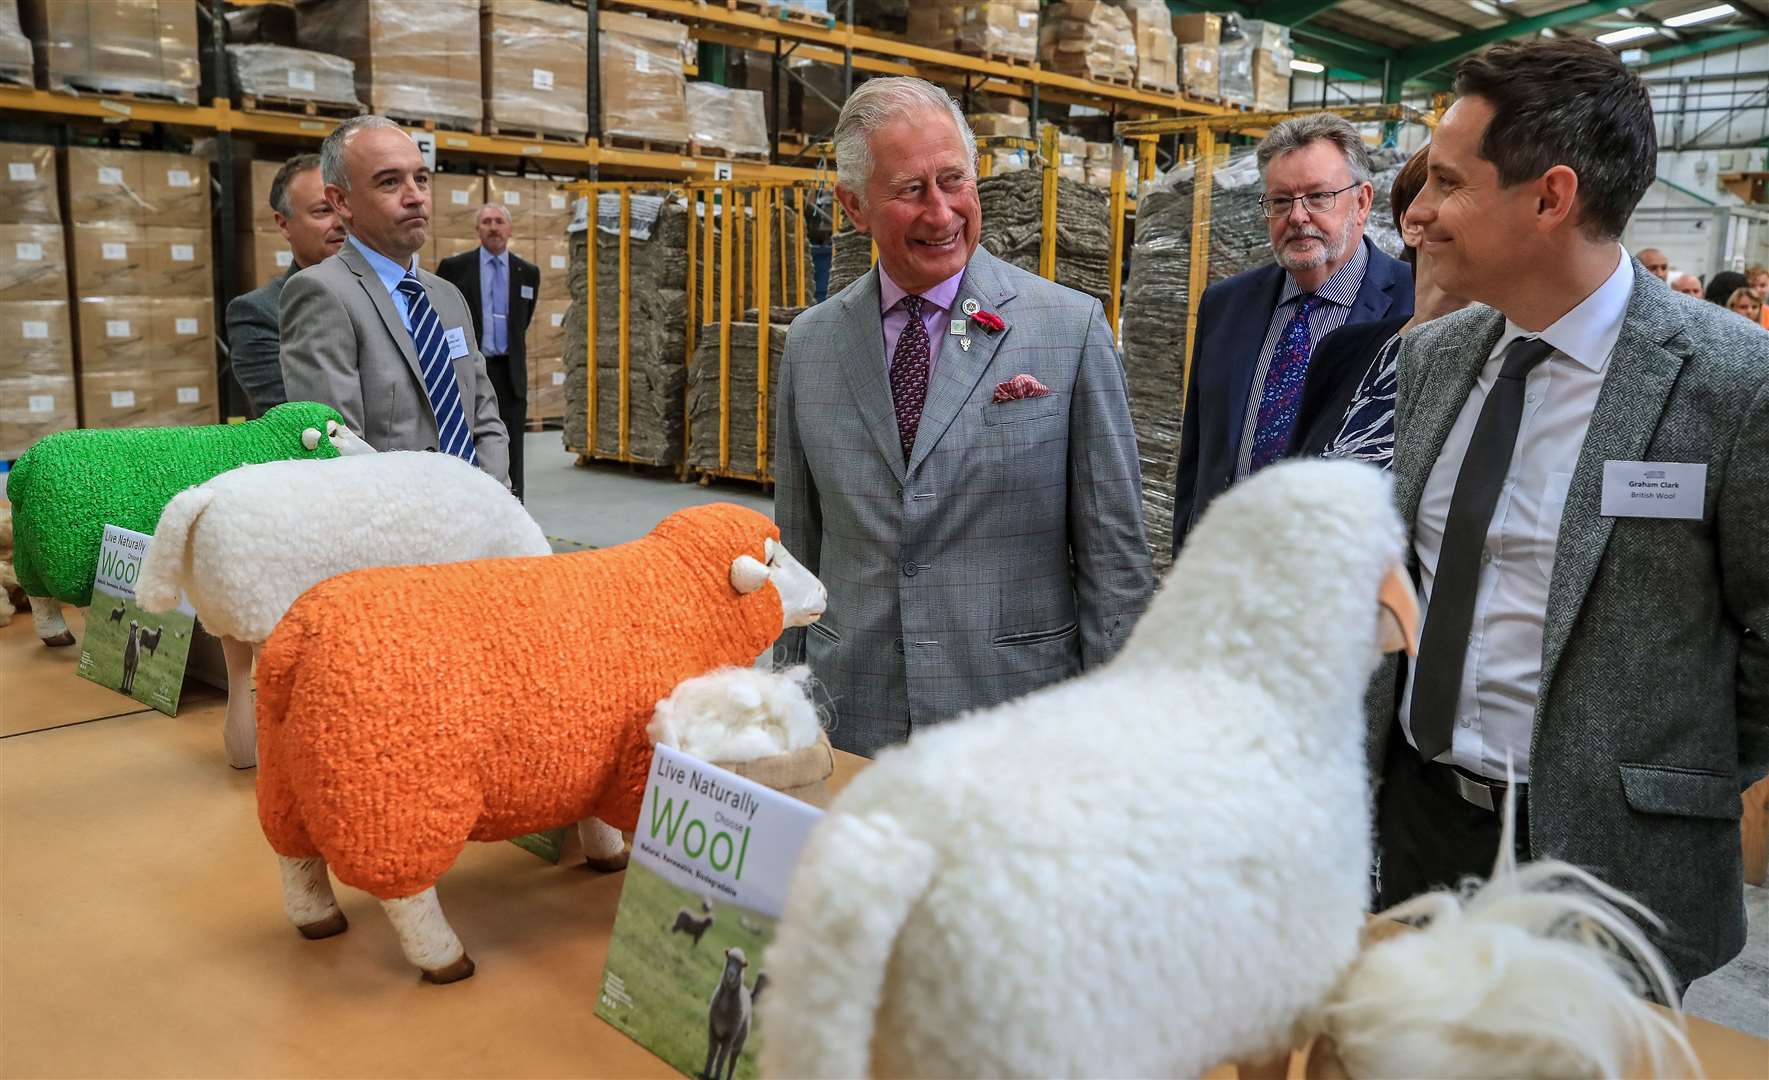 Charles on a visit to Woolcool in Stone, Staffordshire, to learn how they use sheep’s wool to create alternative sustainable packaging for food and medicine in 2019 (Peter Byrne/PA)